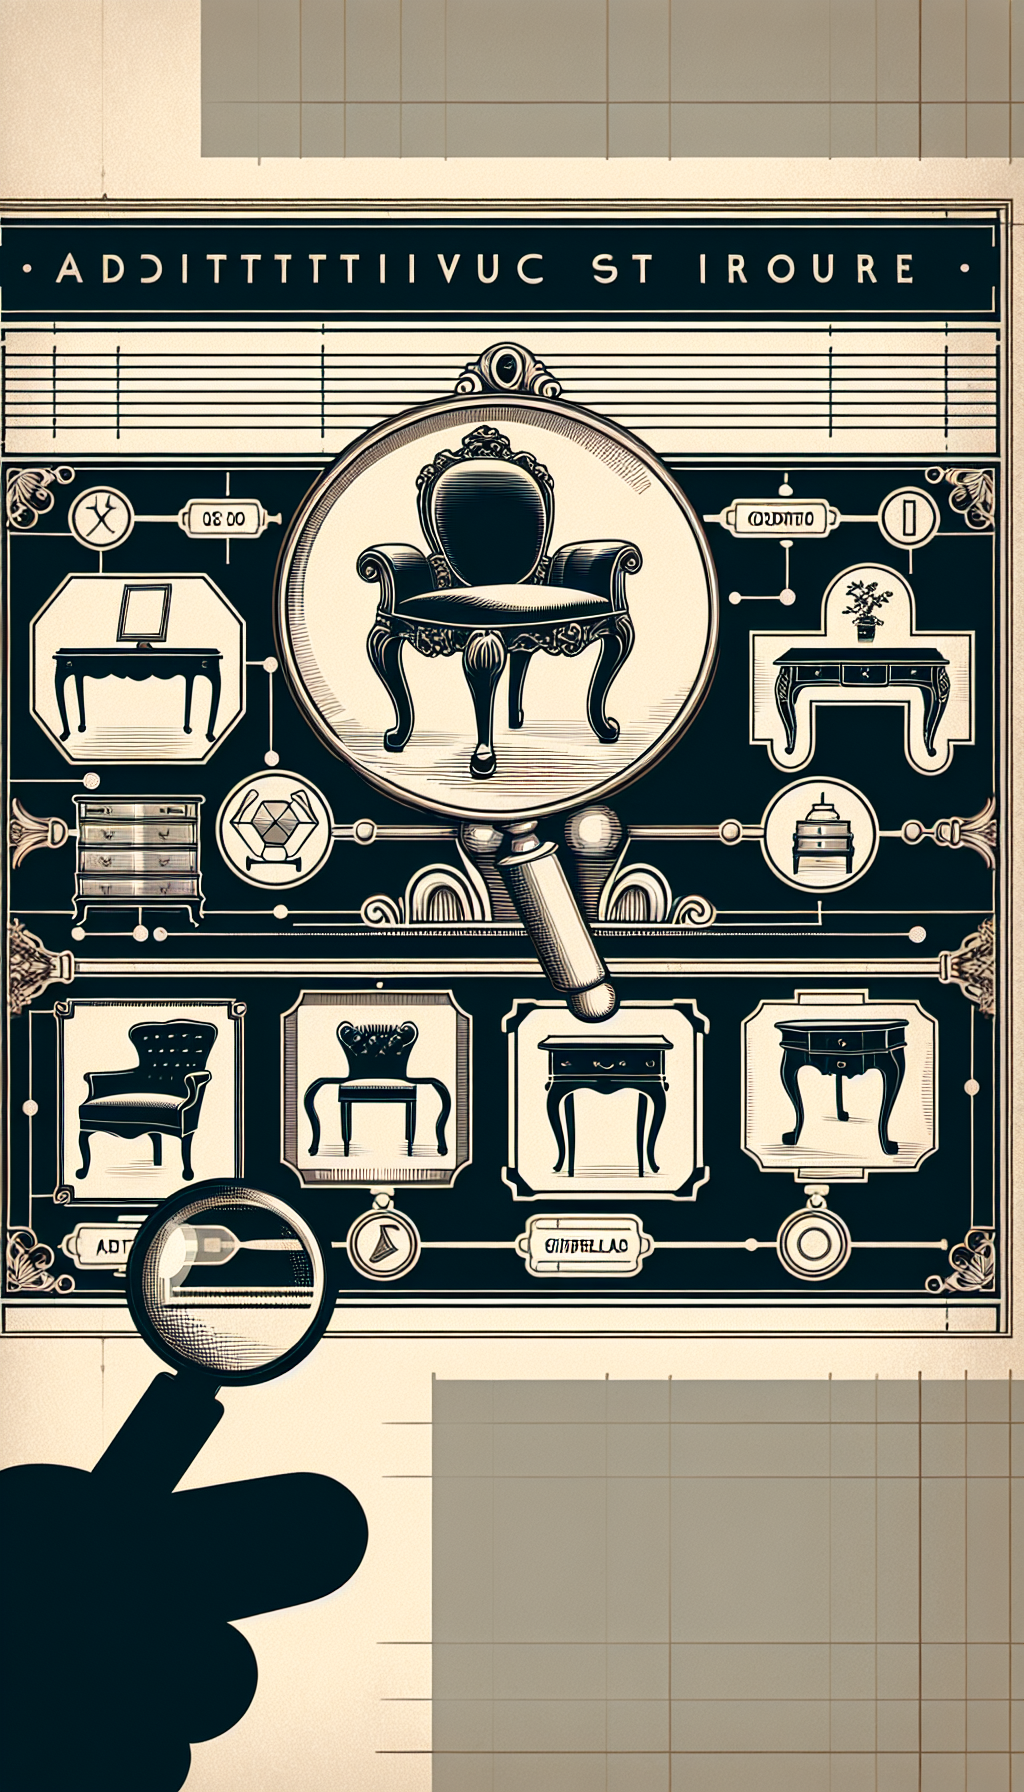 An illustrative timeline unfurls showcasing silhouette outlines of iconic antique furniture pieces from different historical periods—an ornate Victorian chair, a sleek Art Deco table, a robust Chippendale desk, etc. Each piece features a magnifying glass hovering above, highlighting key design elements. Simple icons or text tags denote the era each represents, aiding in the 'identify my antique furniture' educational quest.